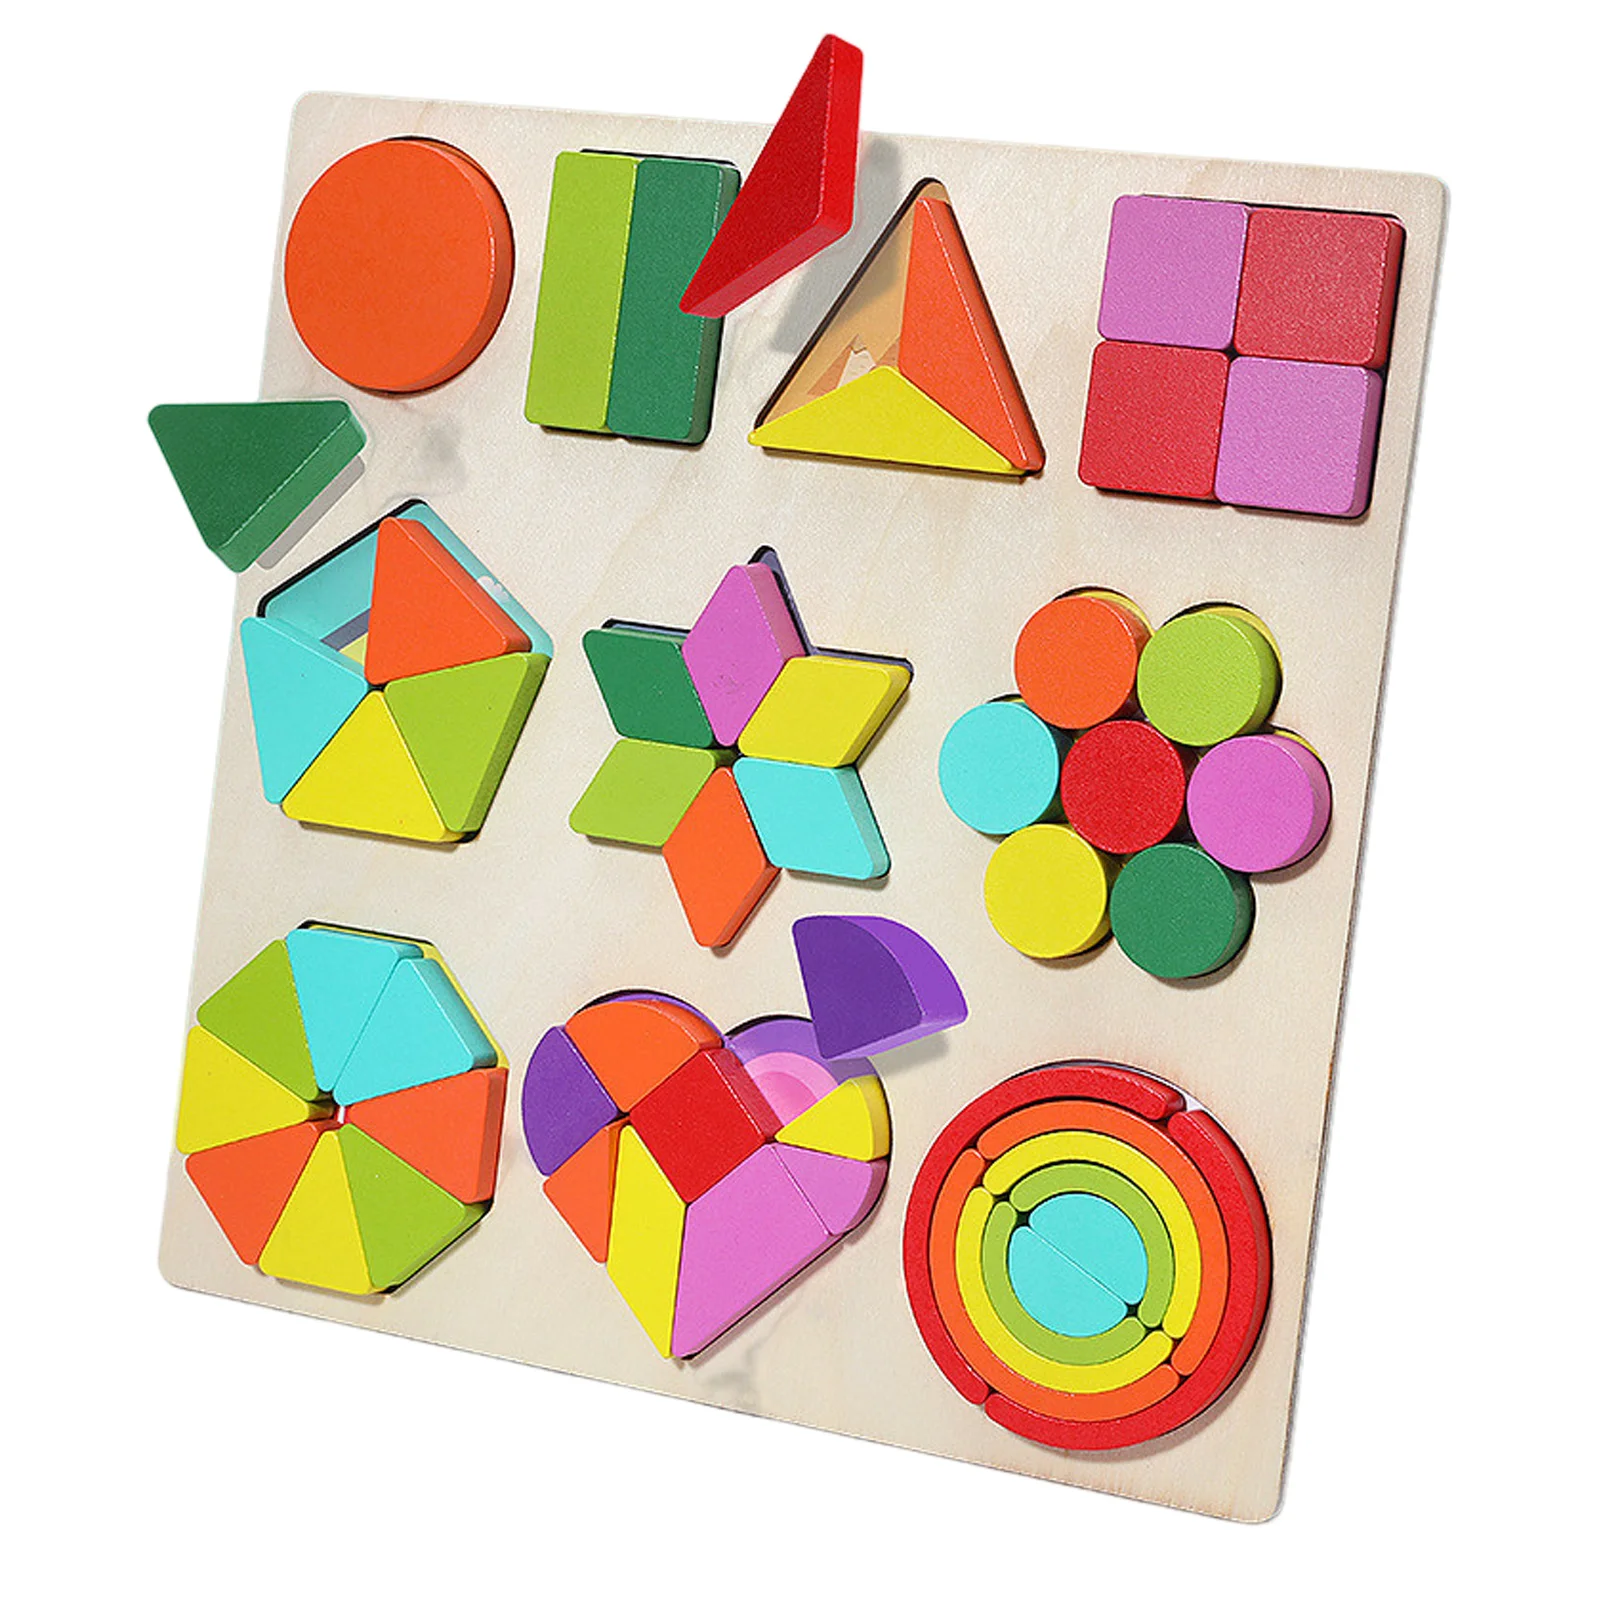 

Wooden Geometric Shapes Montessori Puzzle Sorting Math Bricks Preschool Learning Educational Game Baby Toddler Toys For Children